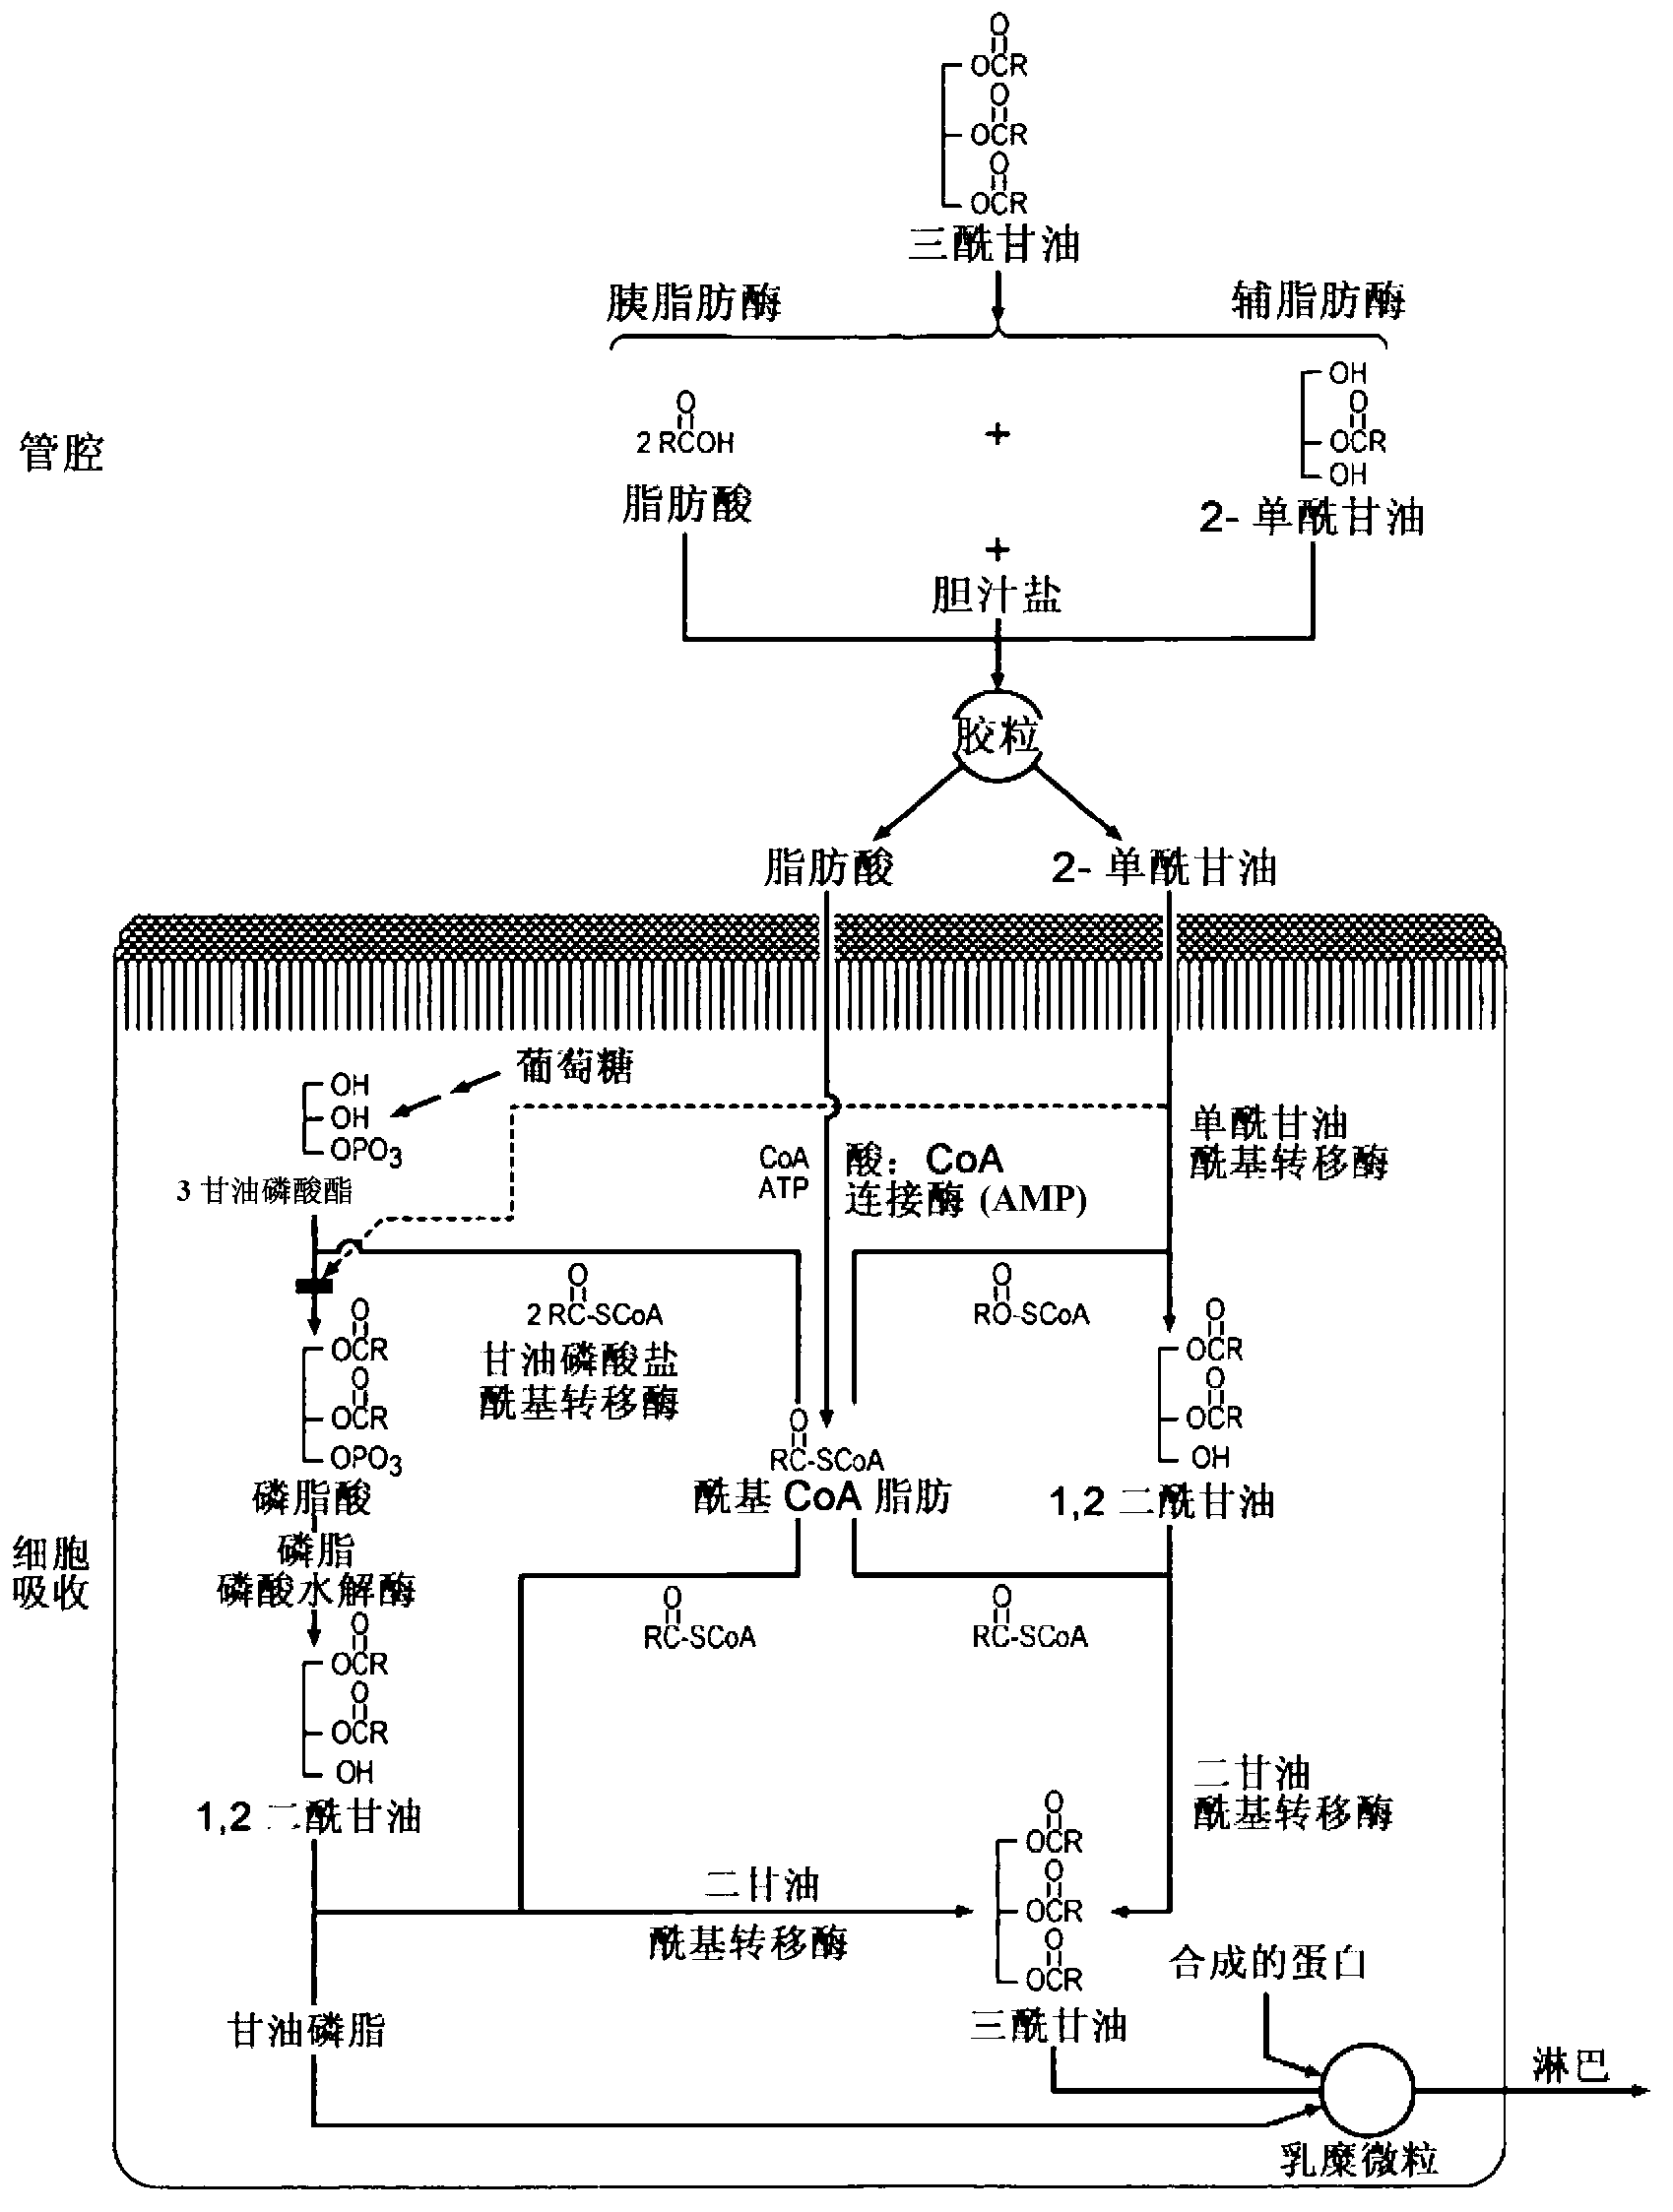 Composition comprising a combination of at least one proteolytic enzyme and at least one lipolytic enzyme, for use in preventing triglyceride synthesis